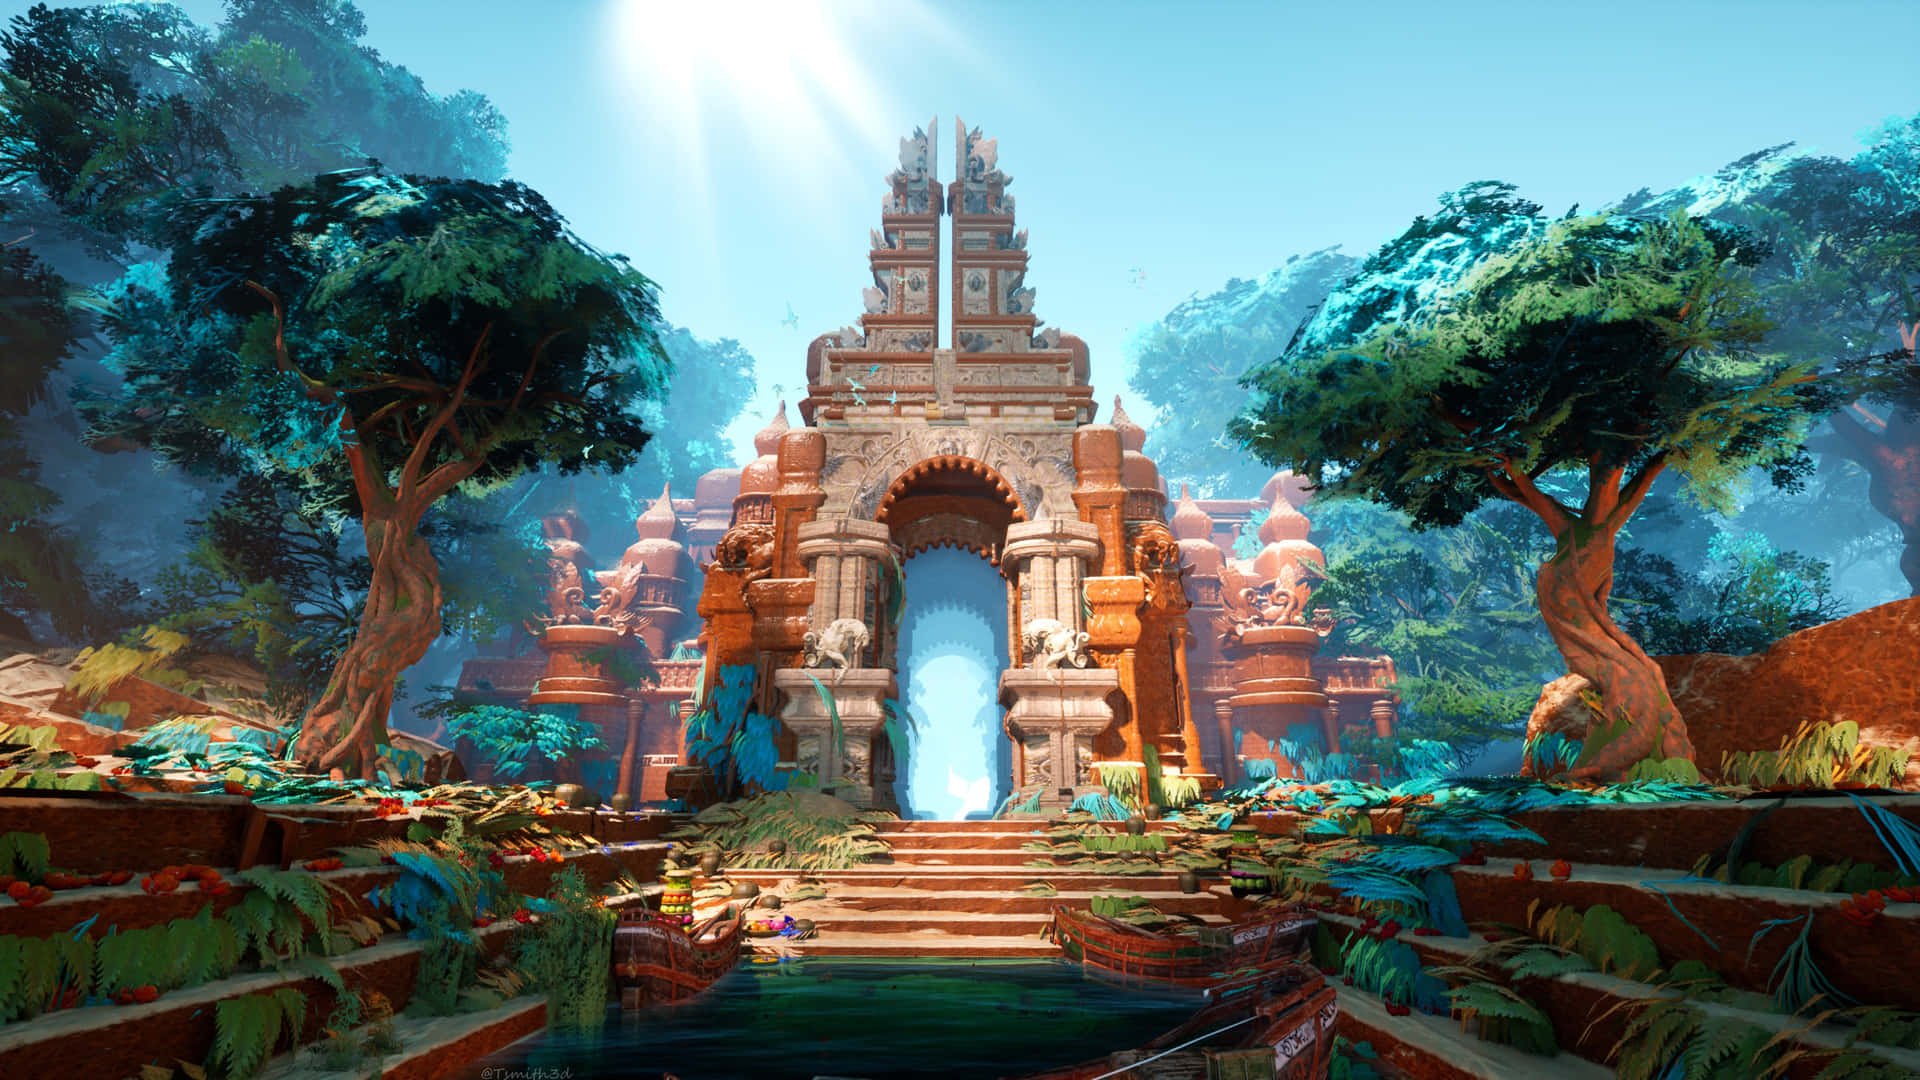 Sit under the sun and contemplate the beauty of this Temple